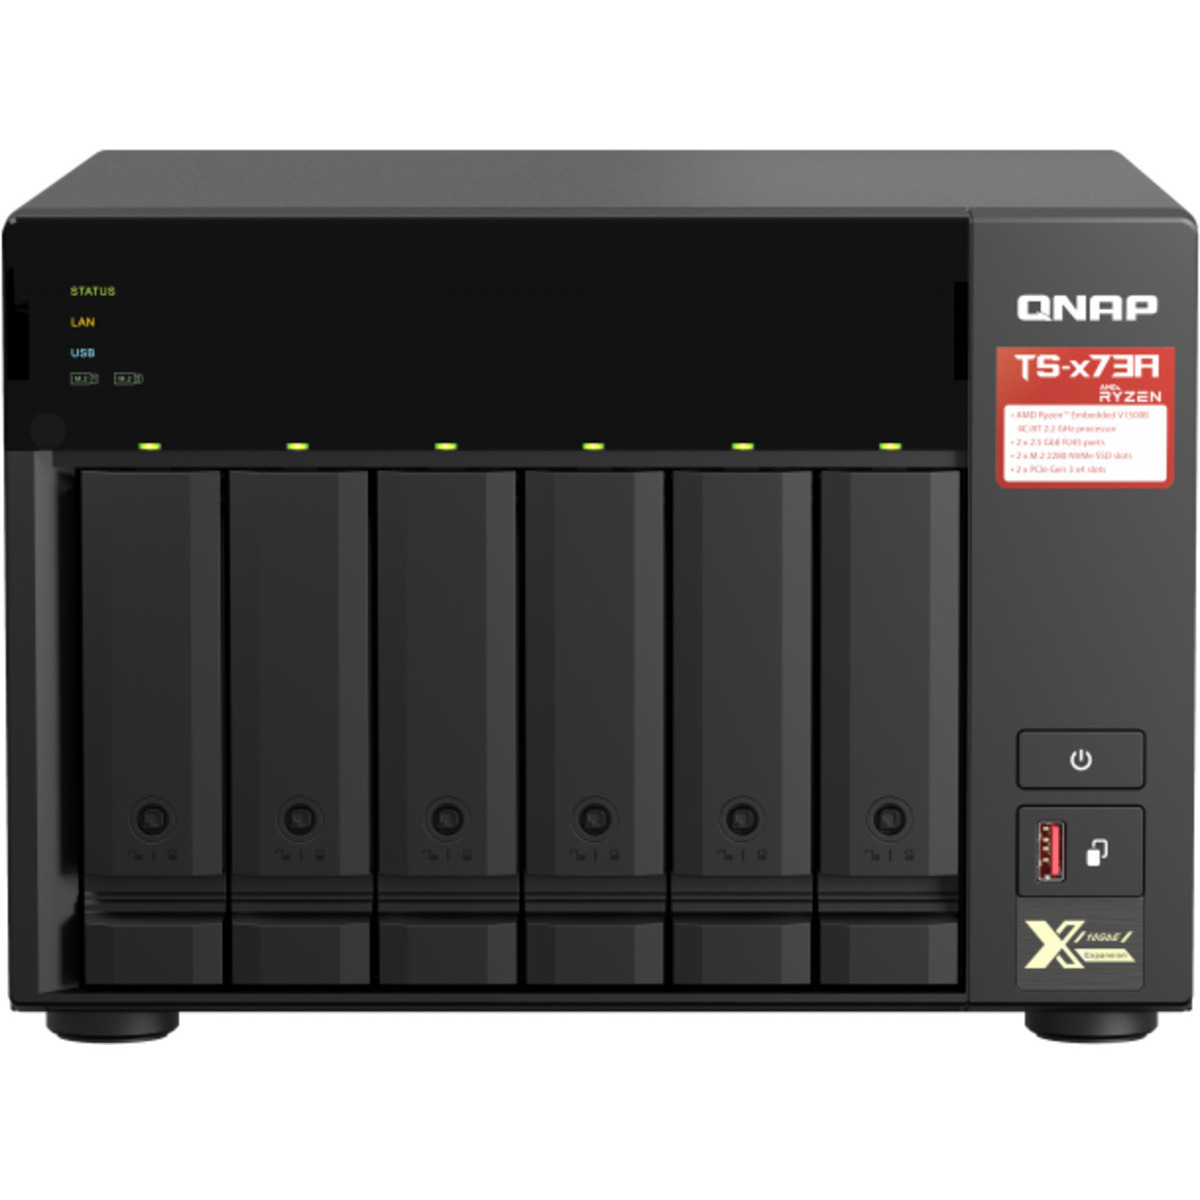 QNAP TS-673A 60tb 6-Bay Desktop Multimedia / Power User / Business NAS - Network Attached Storage Device 6x10tb Seagate IronWolf Pro ST10000NT001 3.5 7200rpm SATA 6Gb/s HDD NAS Class Drives Installed - Burn-In Tested - ON SALE TS-673A